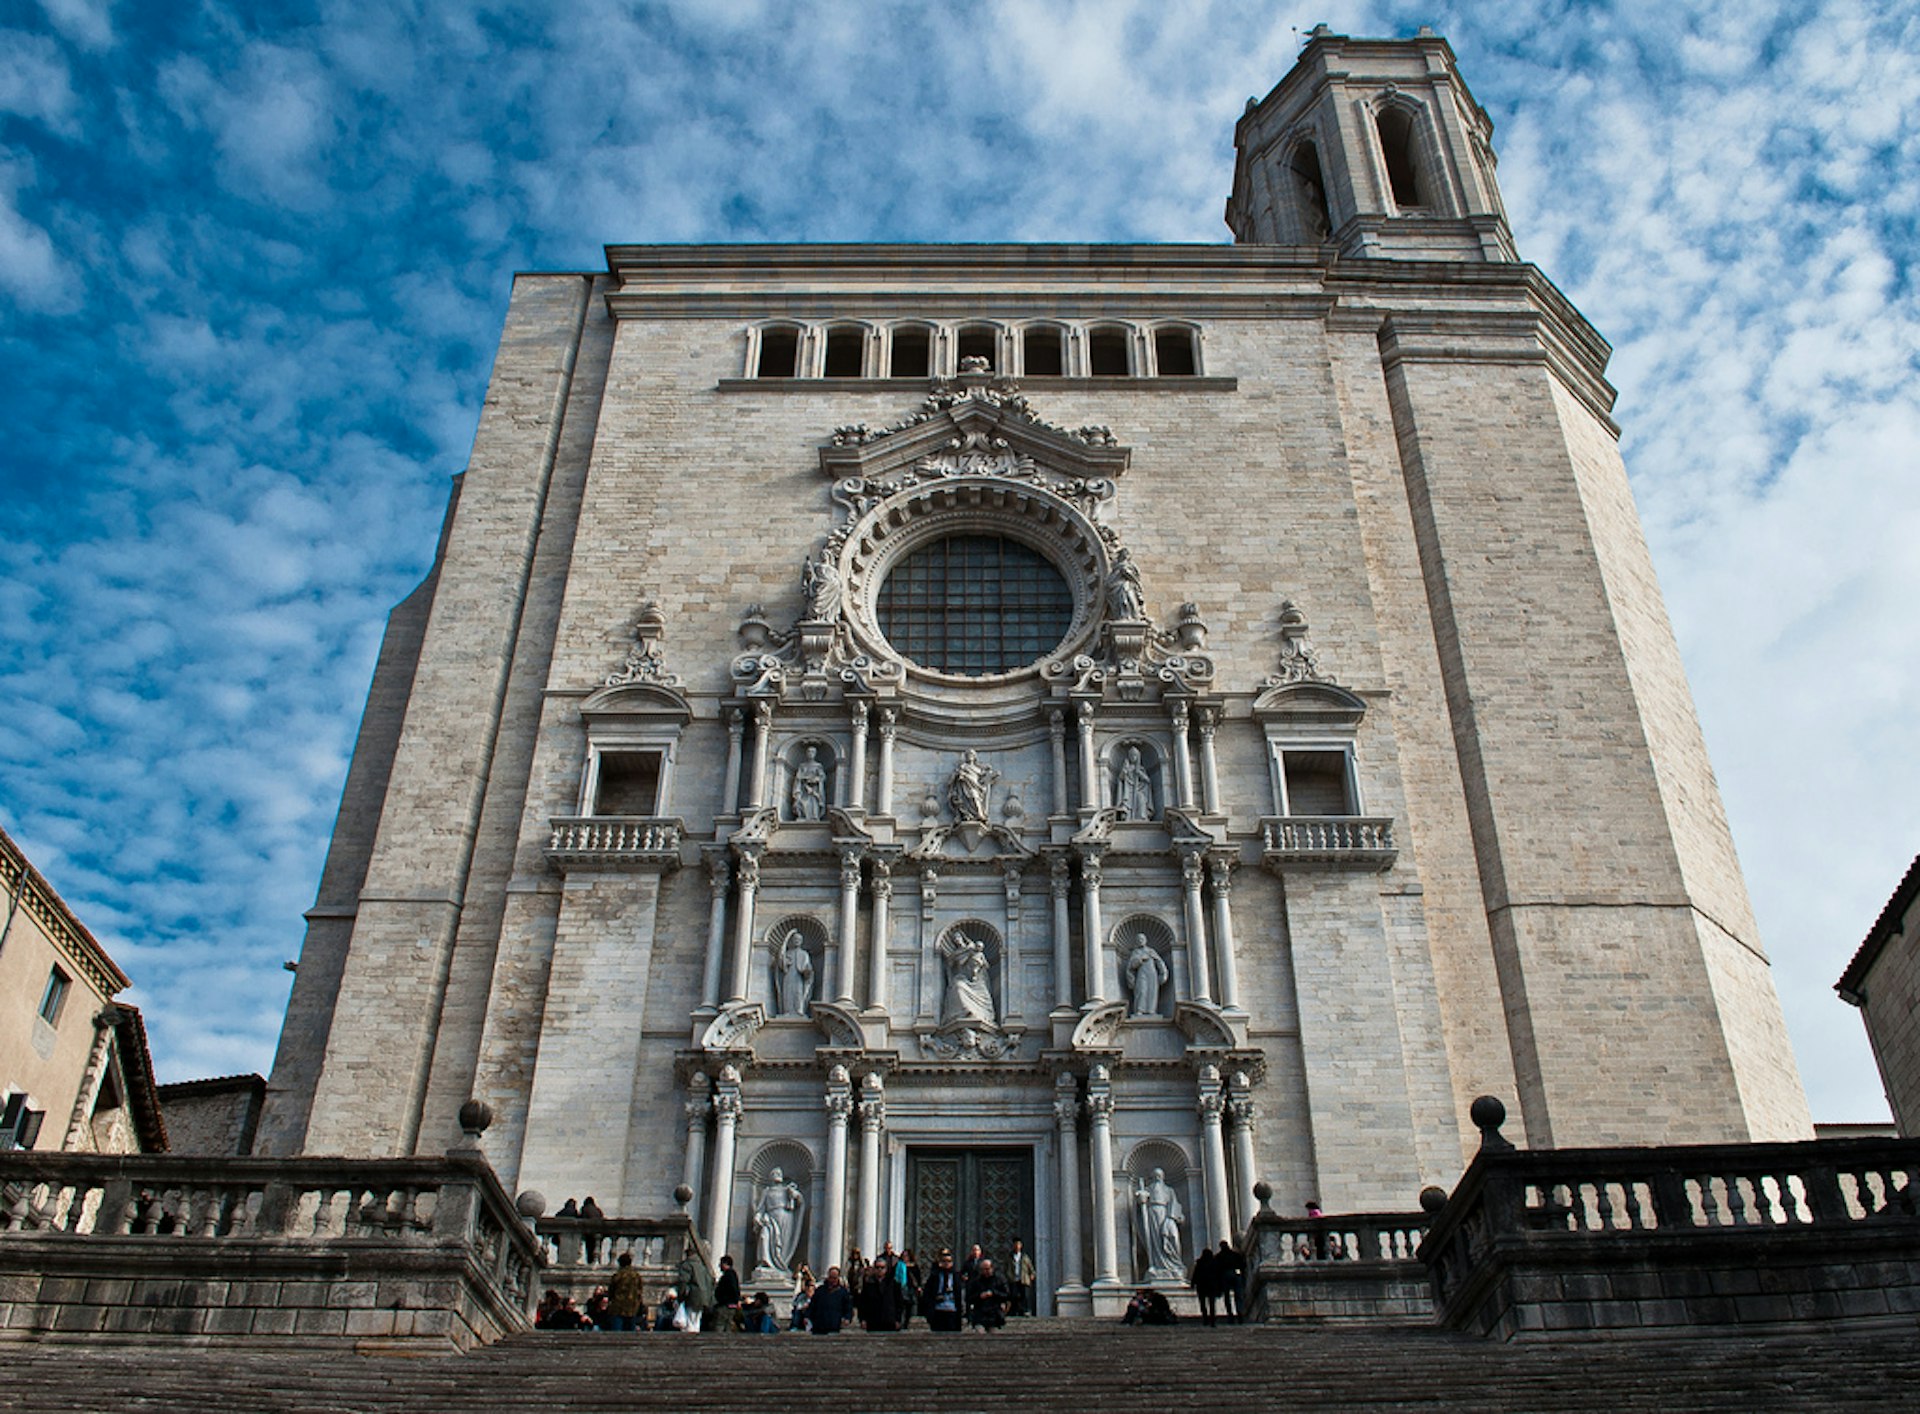 Girona's Gothic cathedral. Image by Davidlohr Bueso / CC BY 2.0